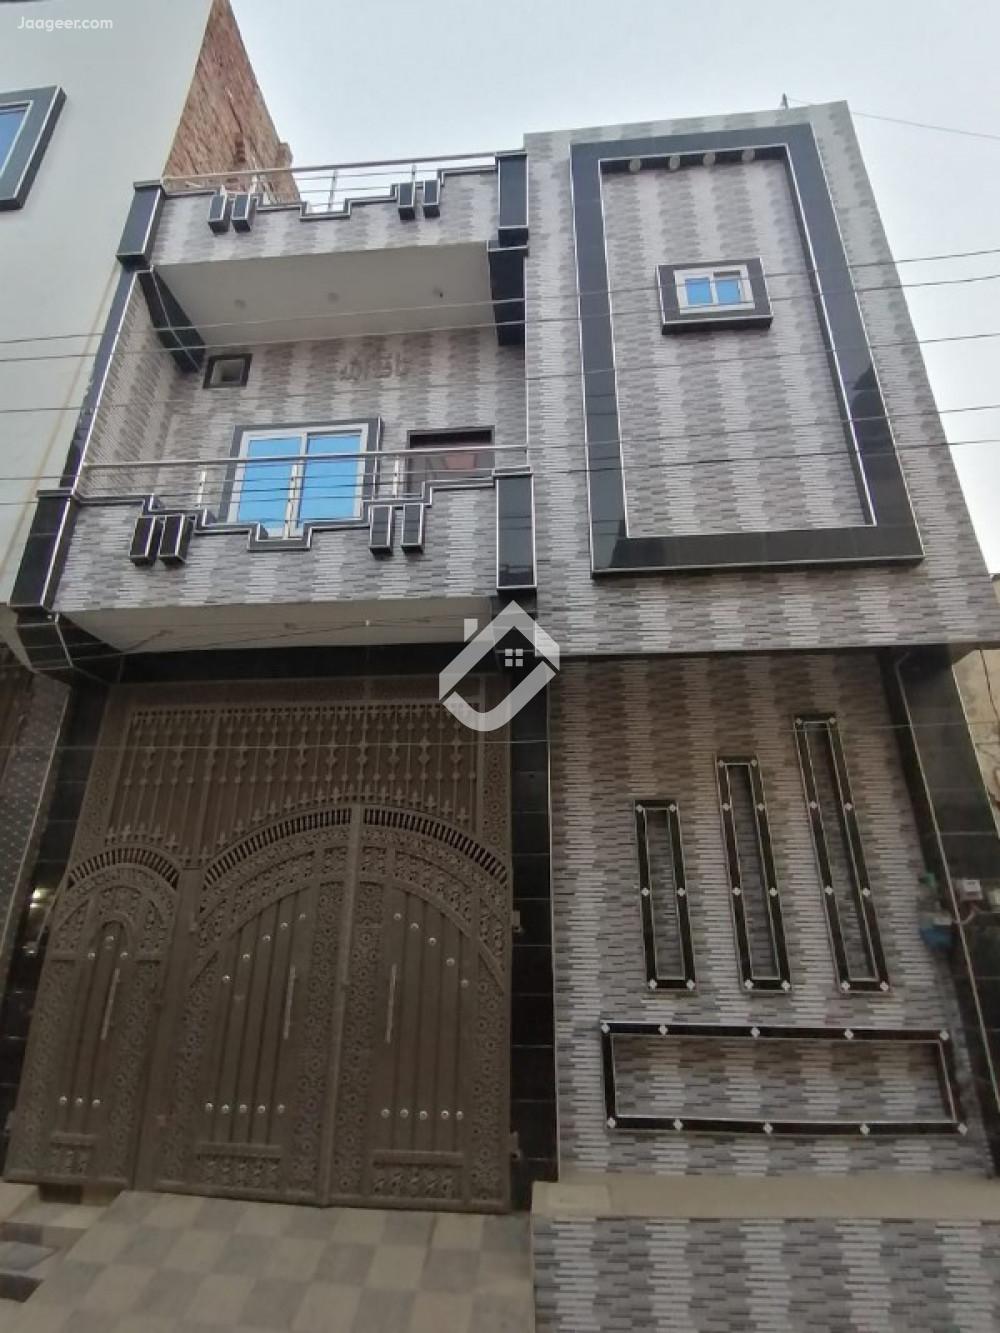 View  3.5 Marla Double Storey House For Sale In Water Supply Road Nearest To Bandialvi Masjid in Water Supply Road, Sargodha